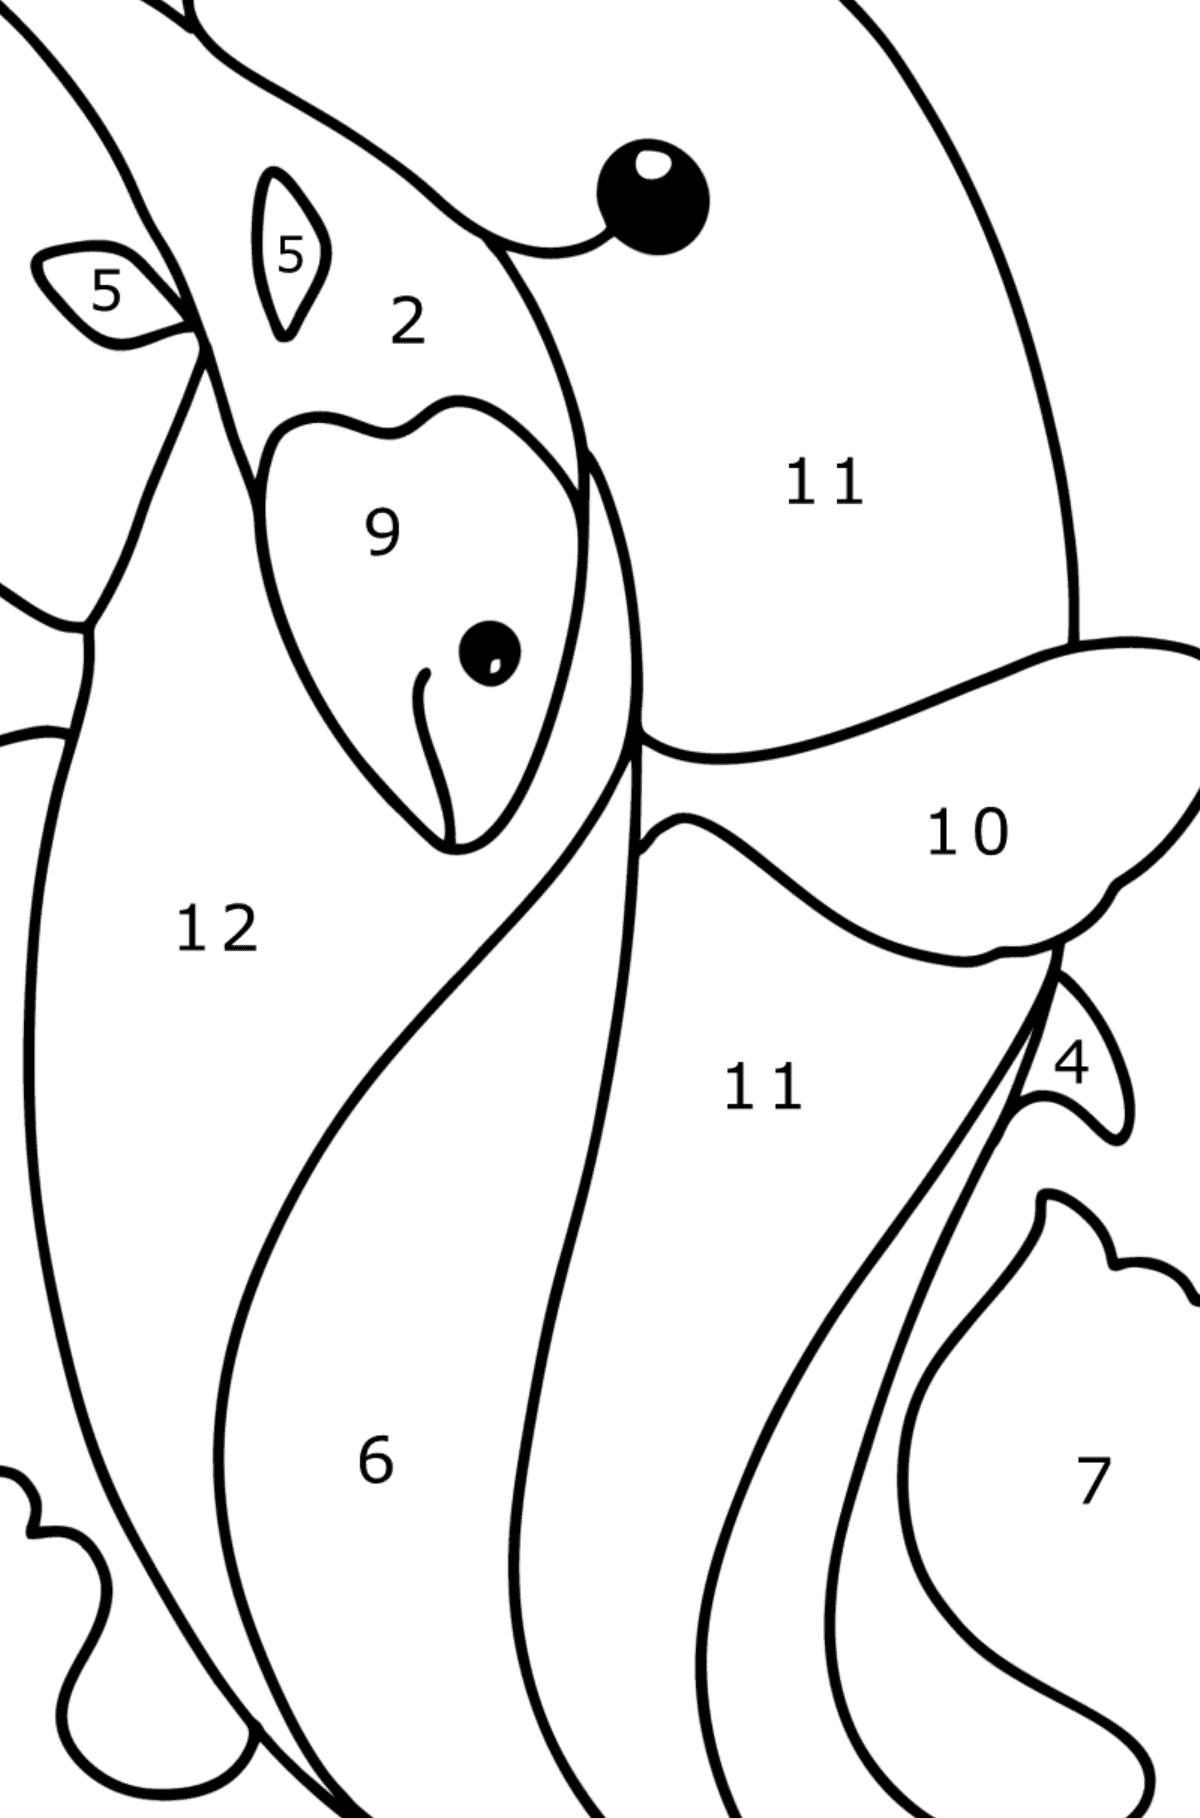 Dolphin Caught a Fish coloring page - Coloring by Numbers for Kids